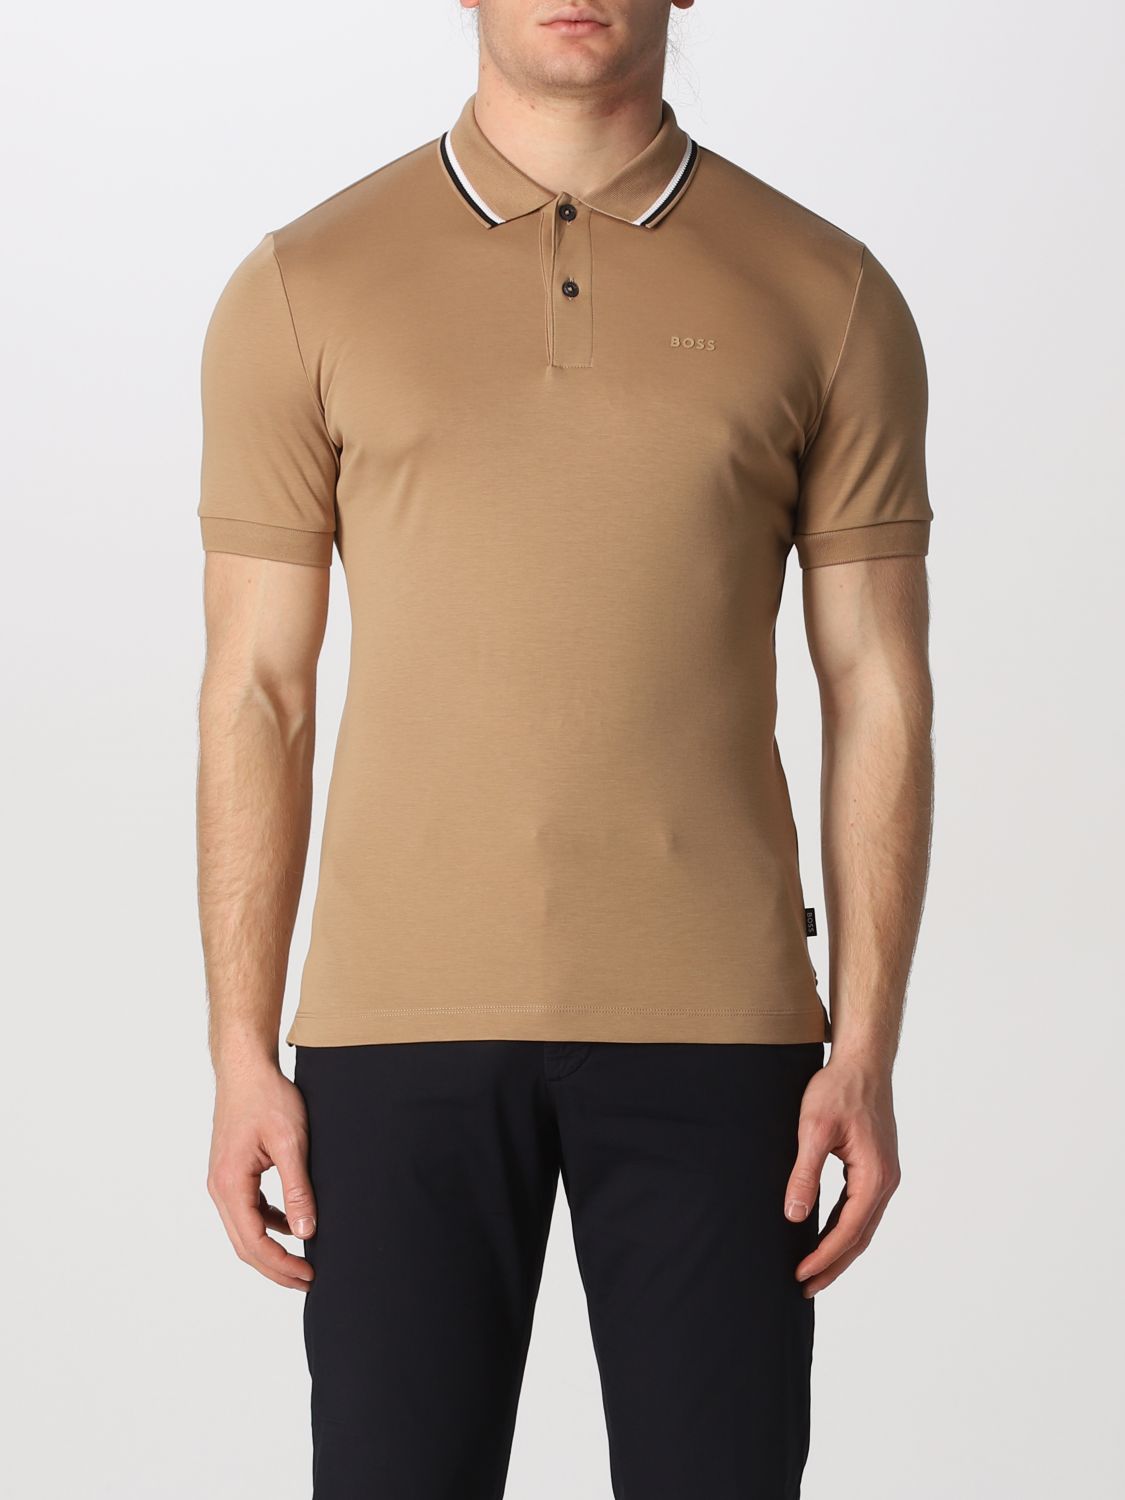 Boss polo for man - Beige | Boss polo shirt 50469360 online GIGLIO.COM